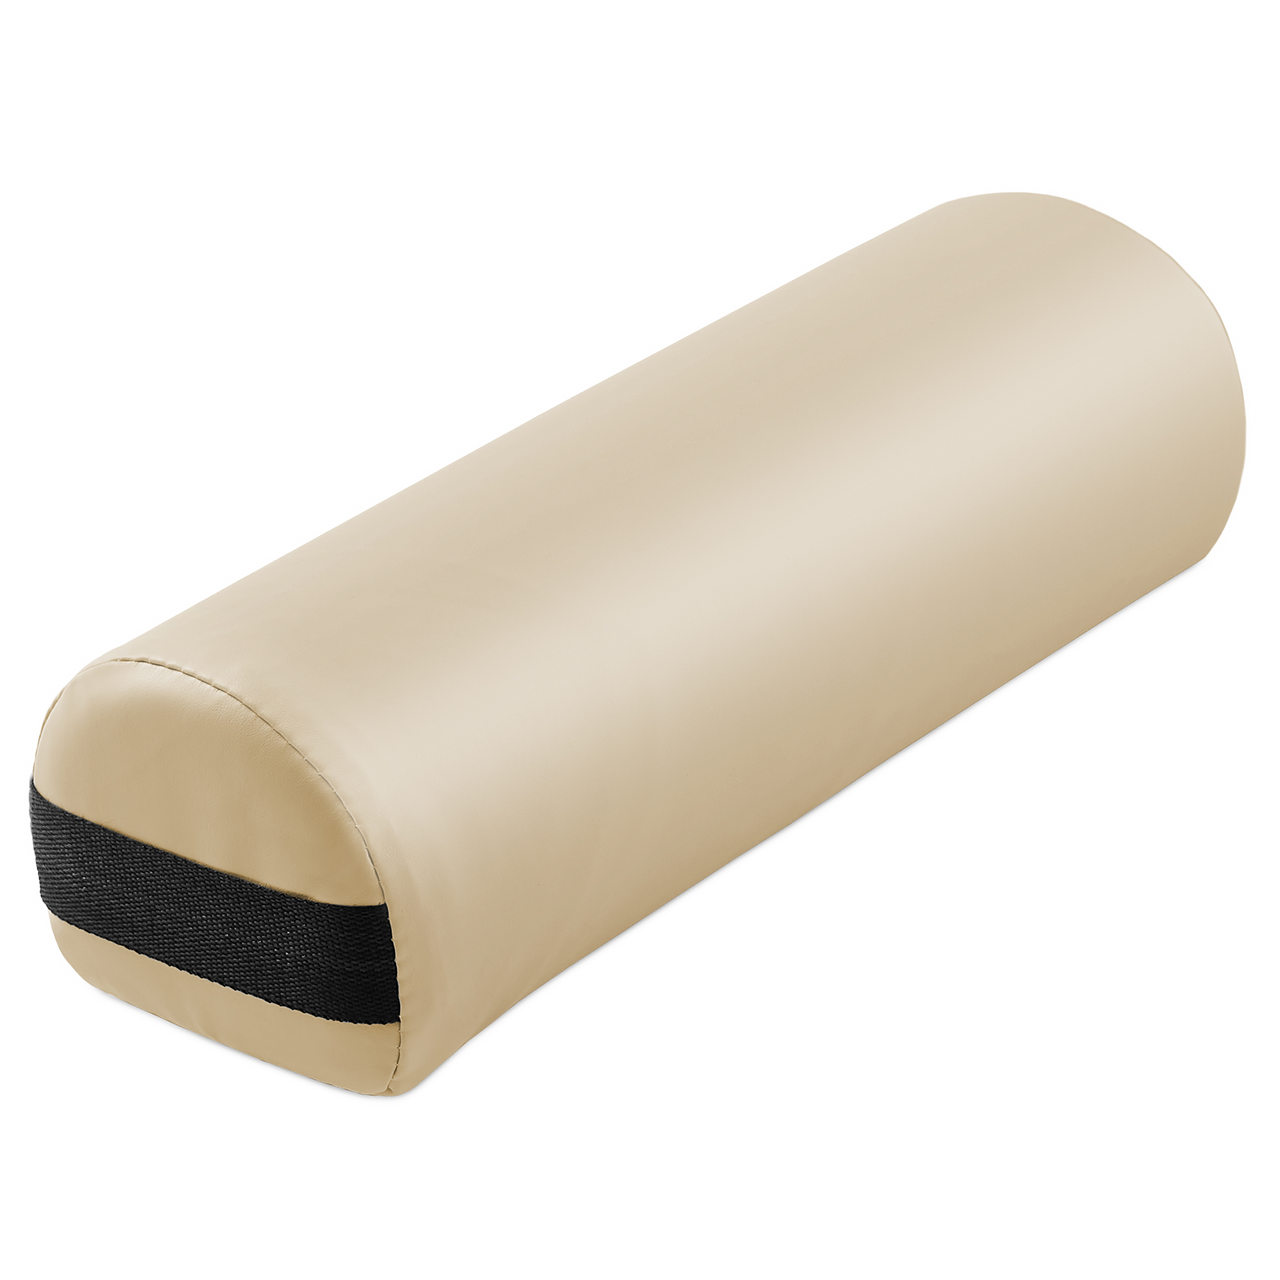 Looking for a Spinalator Table Leg Pillow, IST Leg Bolster, Table Leg bolster, spinalator leg bolster, chattanooga Spinalator leg bolster, leg support, Knee Bolster, Knee pillow, bolster, leg bolster for sale, bolster for sale, leg pillow, Bolster?